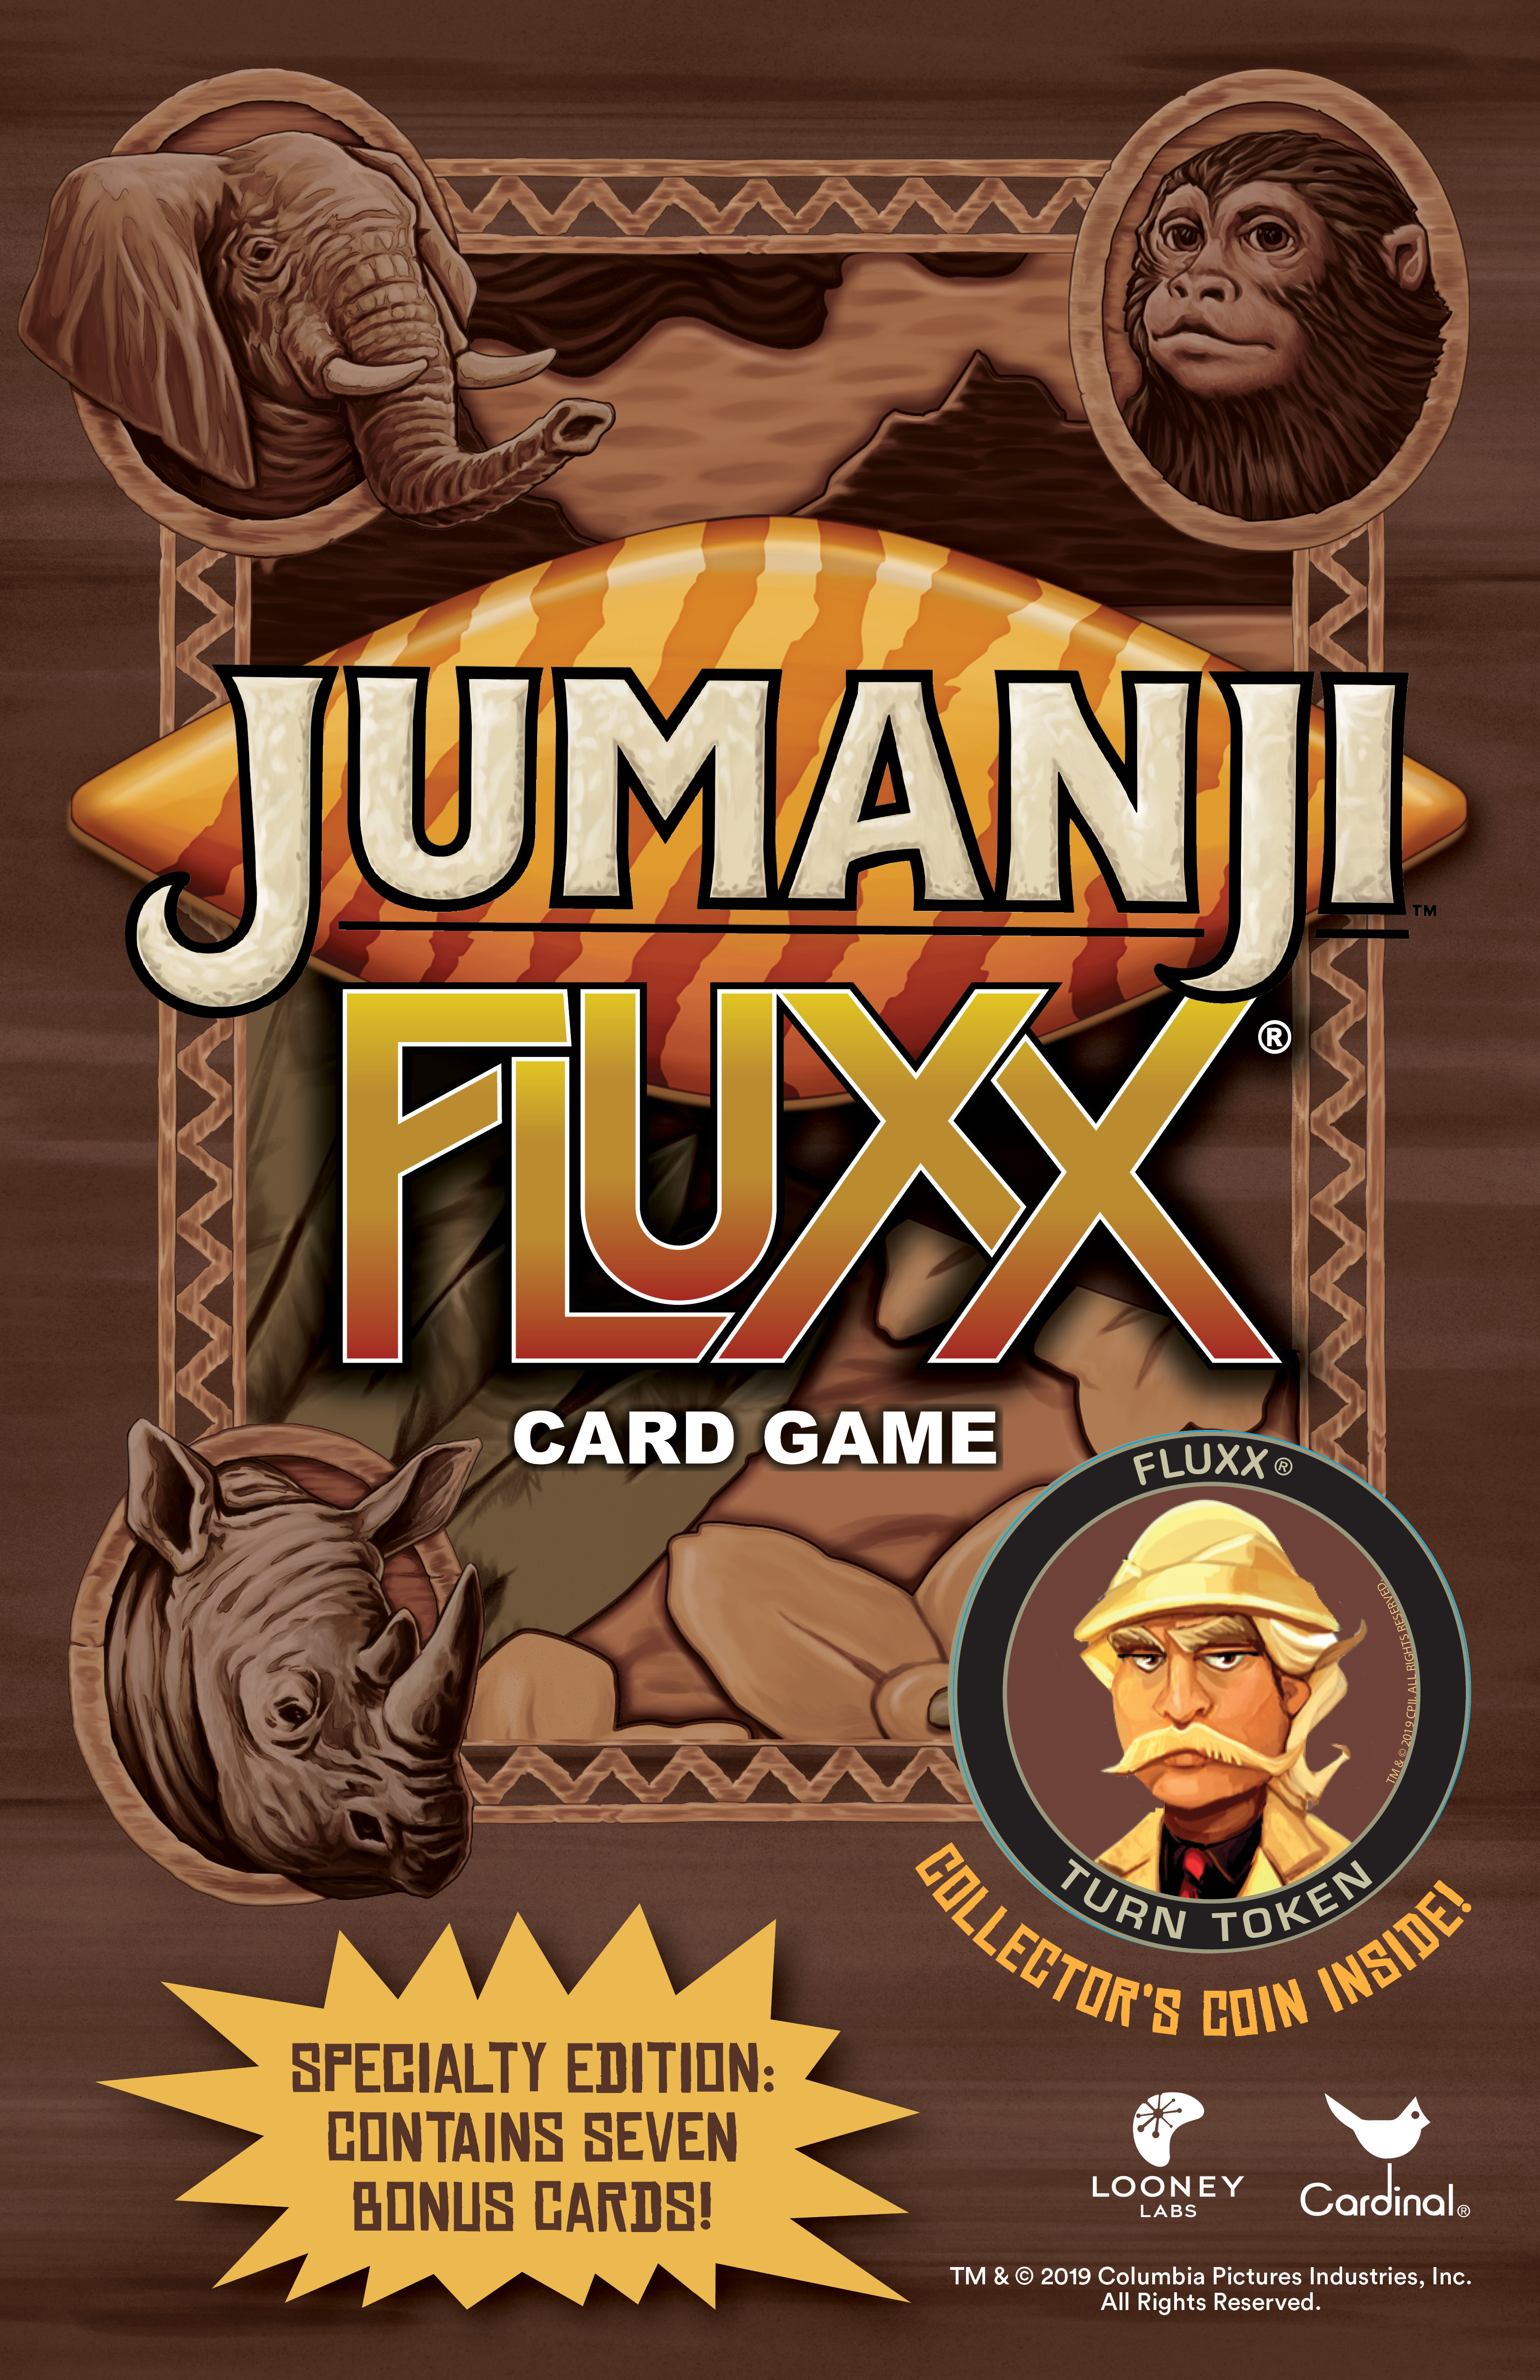 Jumanji Fluxx Specialty Edition Card Game Looney Labs 857848004864 for sale online